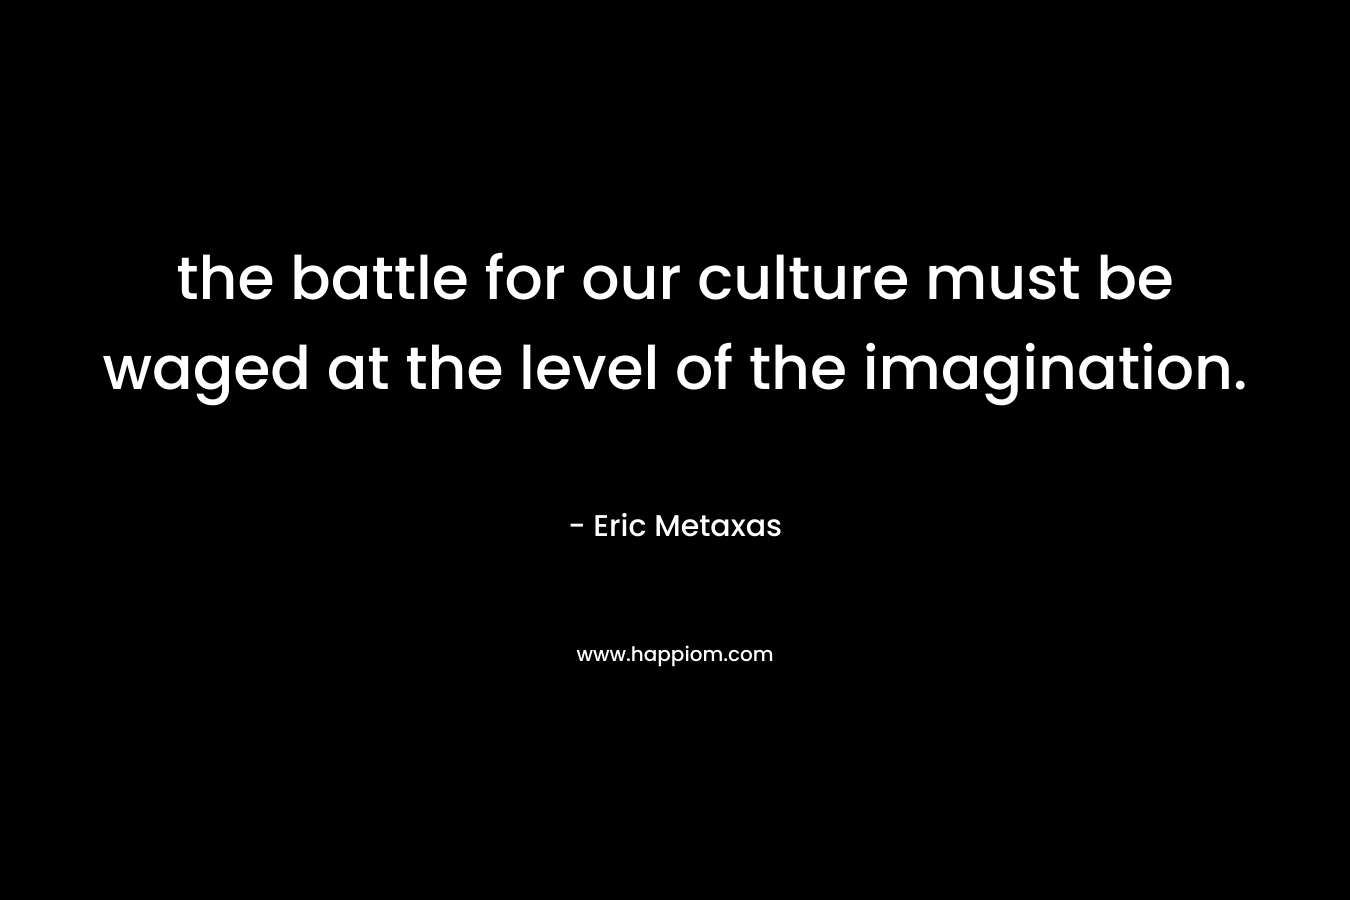 the battle for our culture must be waged at the level of the imagination.